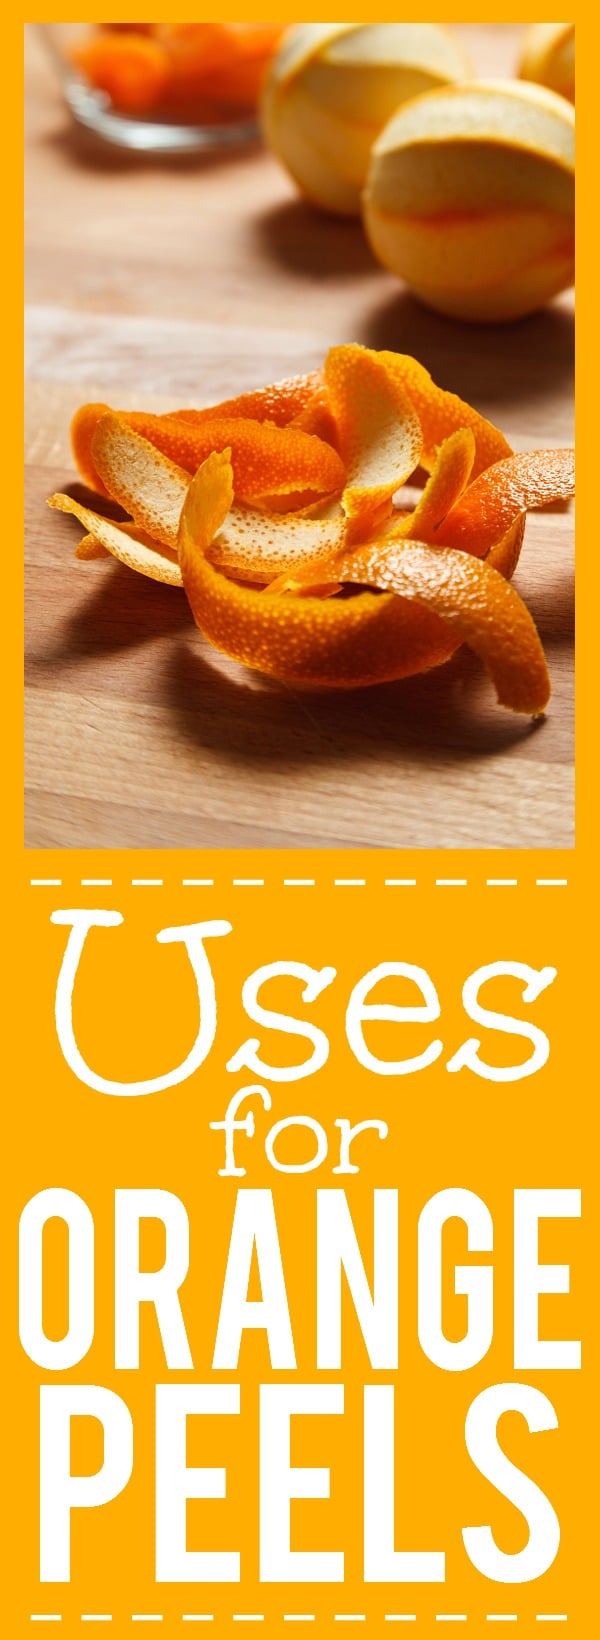 5 Surprising Uses for Orange Peels - Don't throw out your orange rinds! Orange peels have so many uses and you can save money and use the whole fruit with these clever and surprising Uses for Orange Peels. Wow! These are great ways to stay frugal in the kitchen and all around the home!